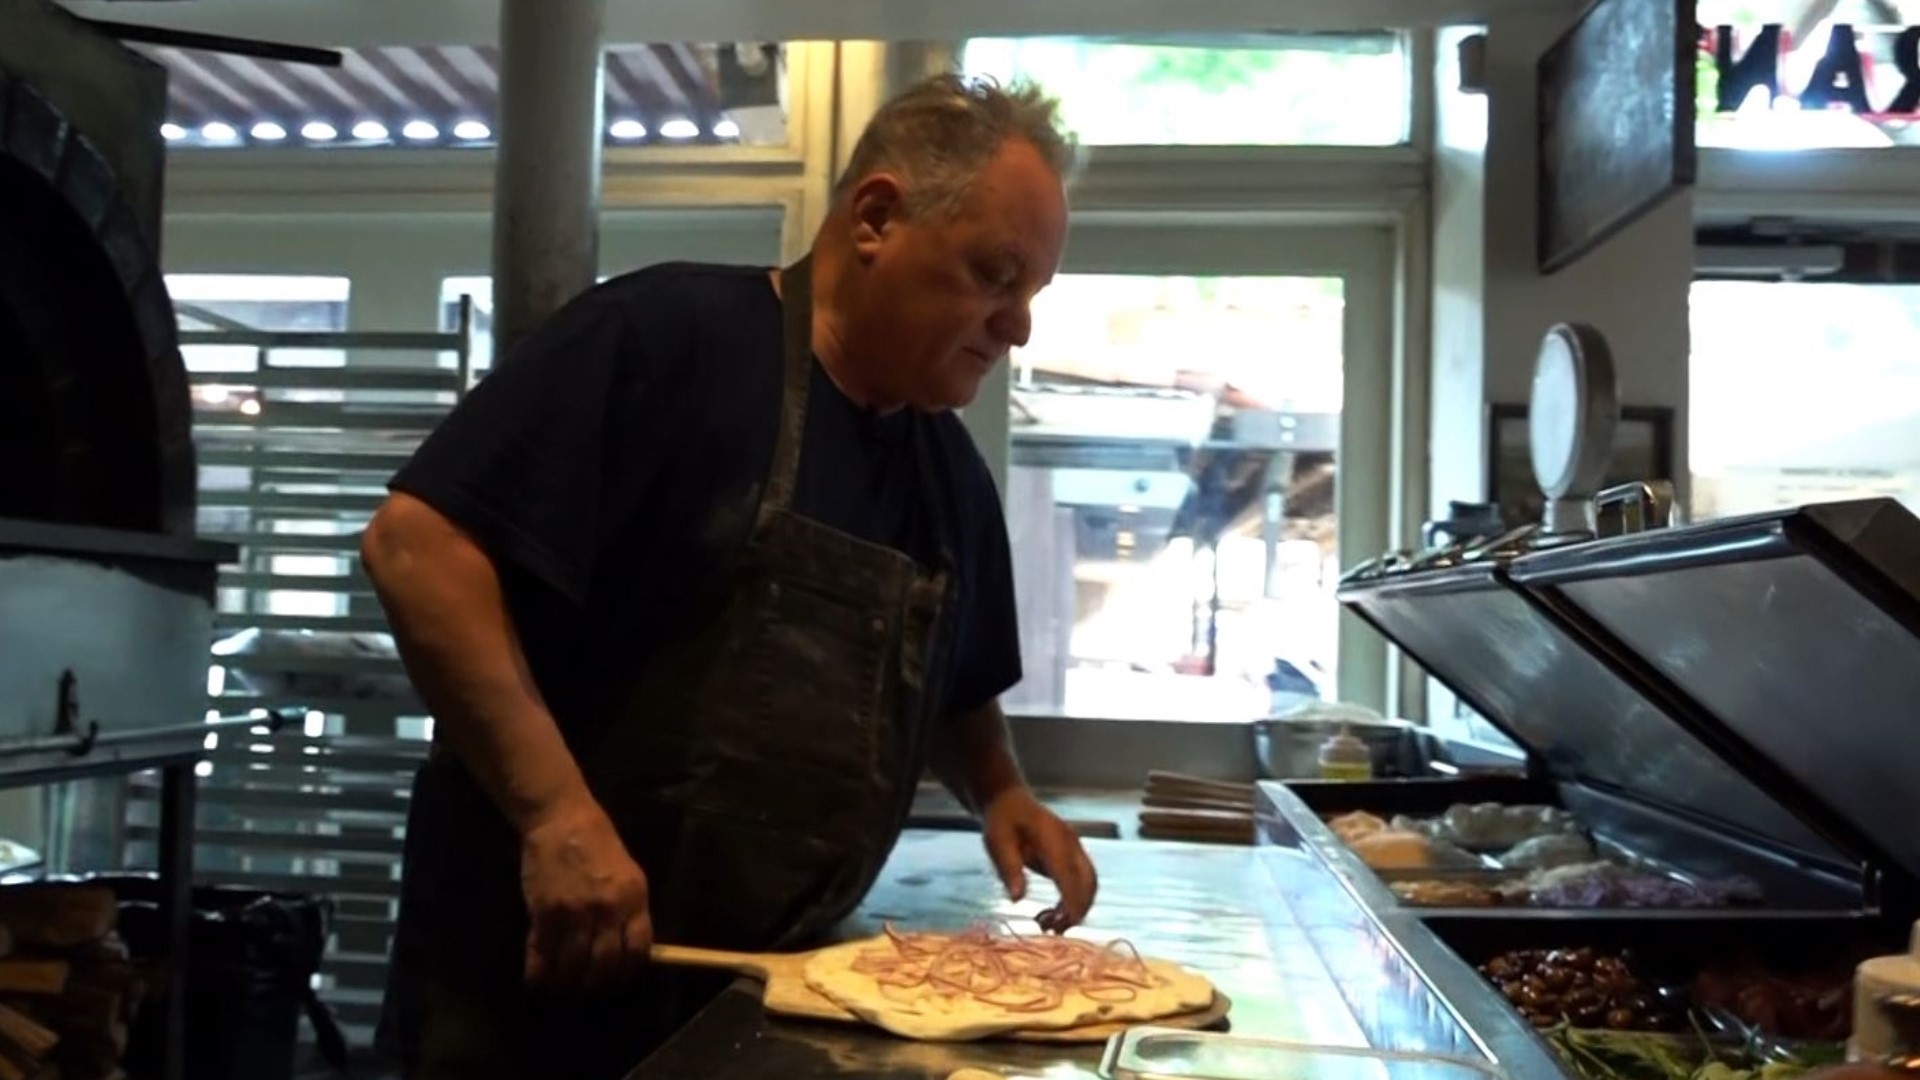 The most famous pizza chef in Arizona deals in perfect pizza and pearls of wisdom.